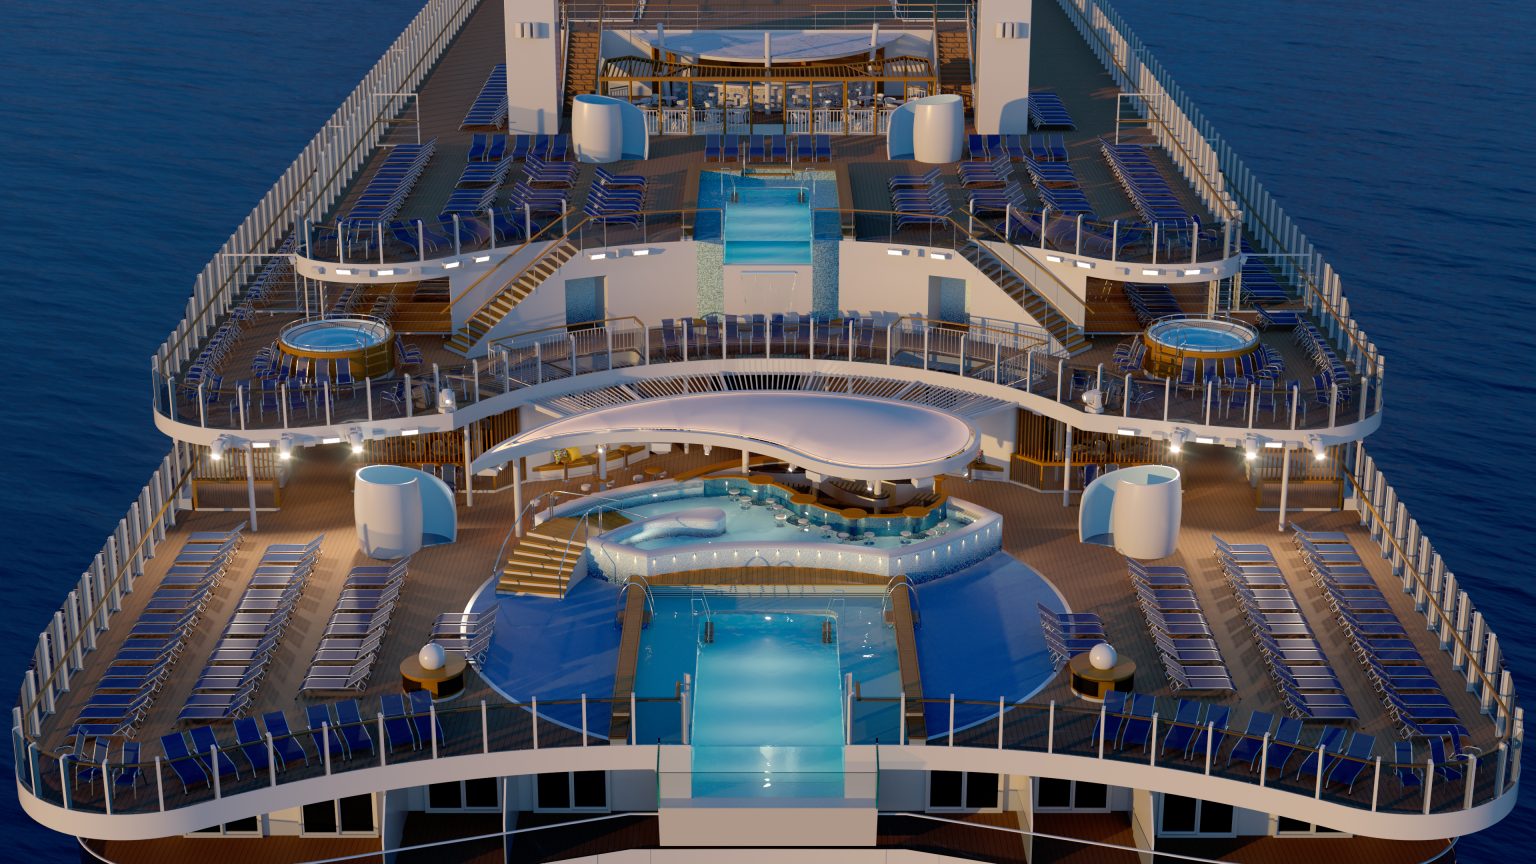 pictures of cruise ship arvia